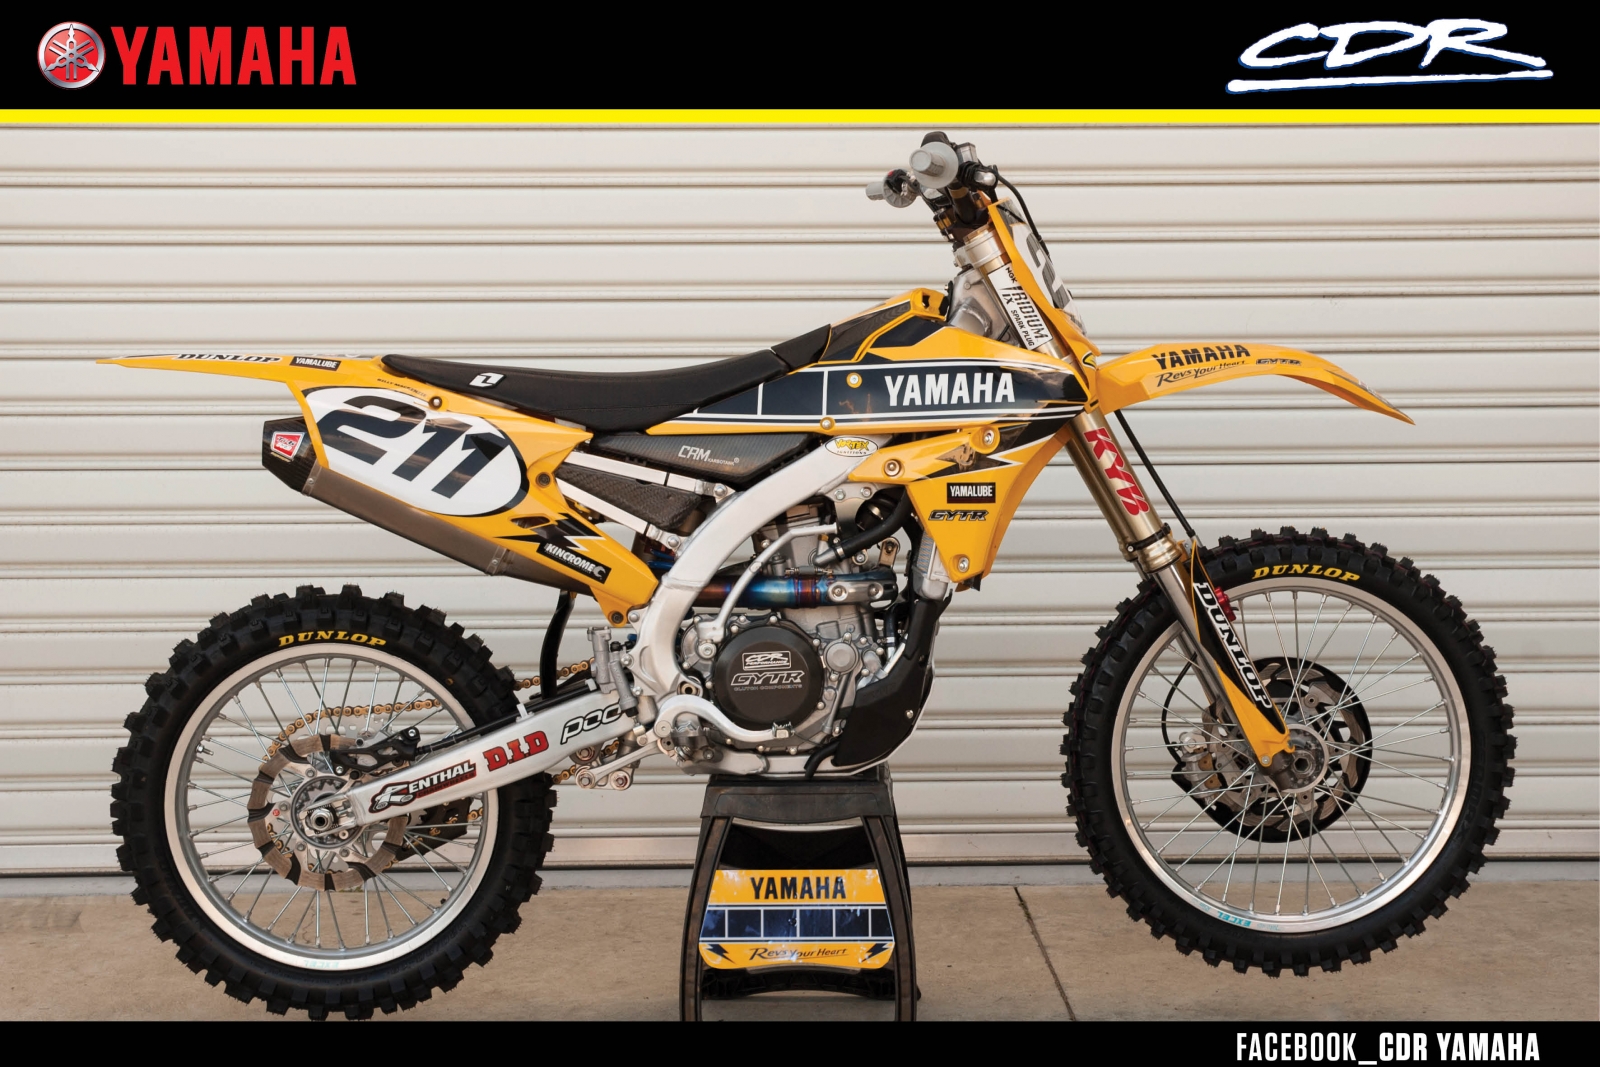 Check out the retro look for CDR Yamaha from Conondale over the weekend, trick!